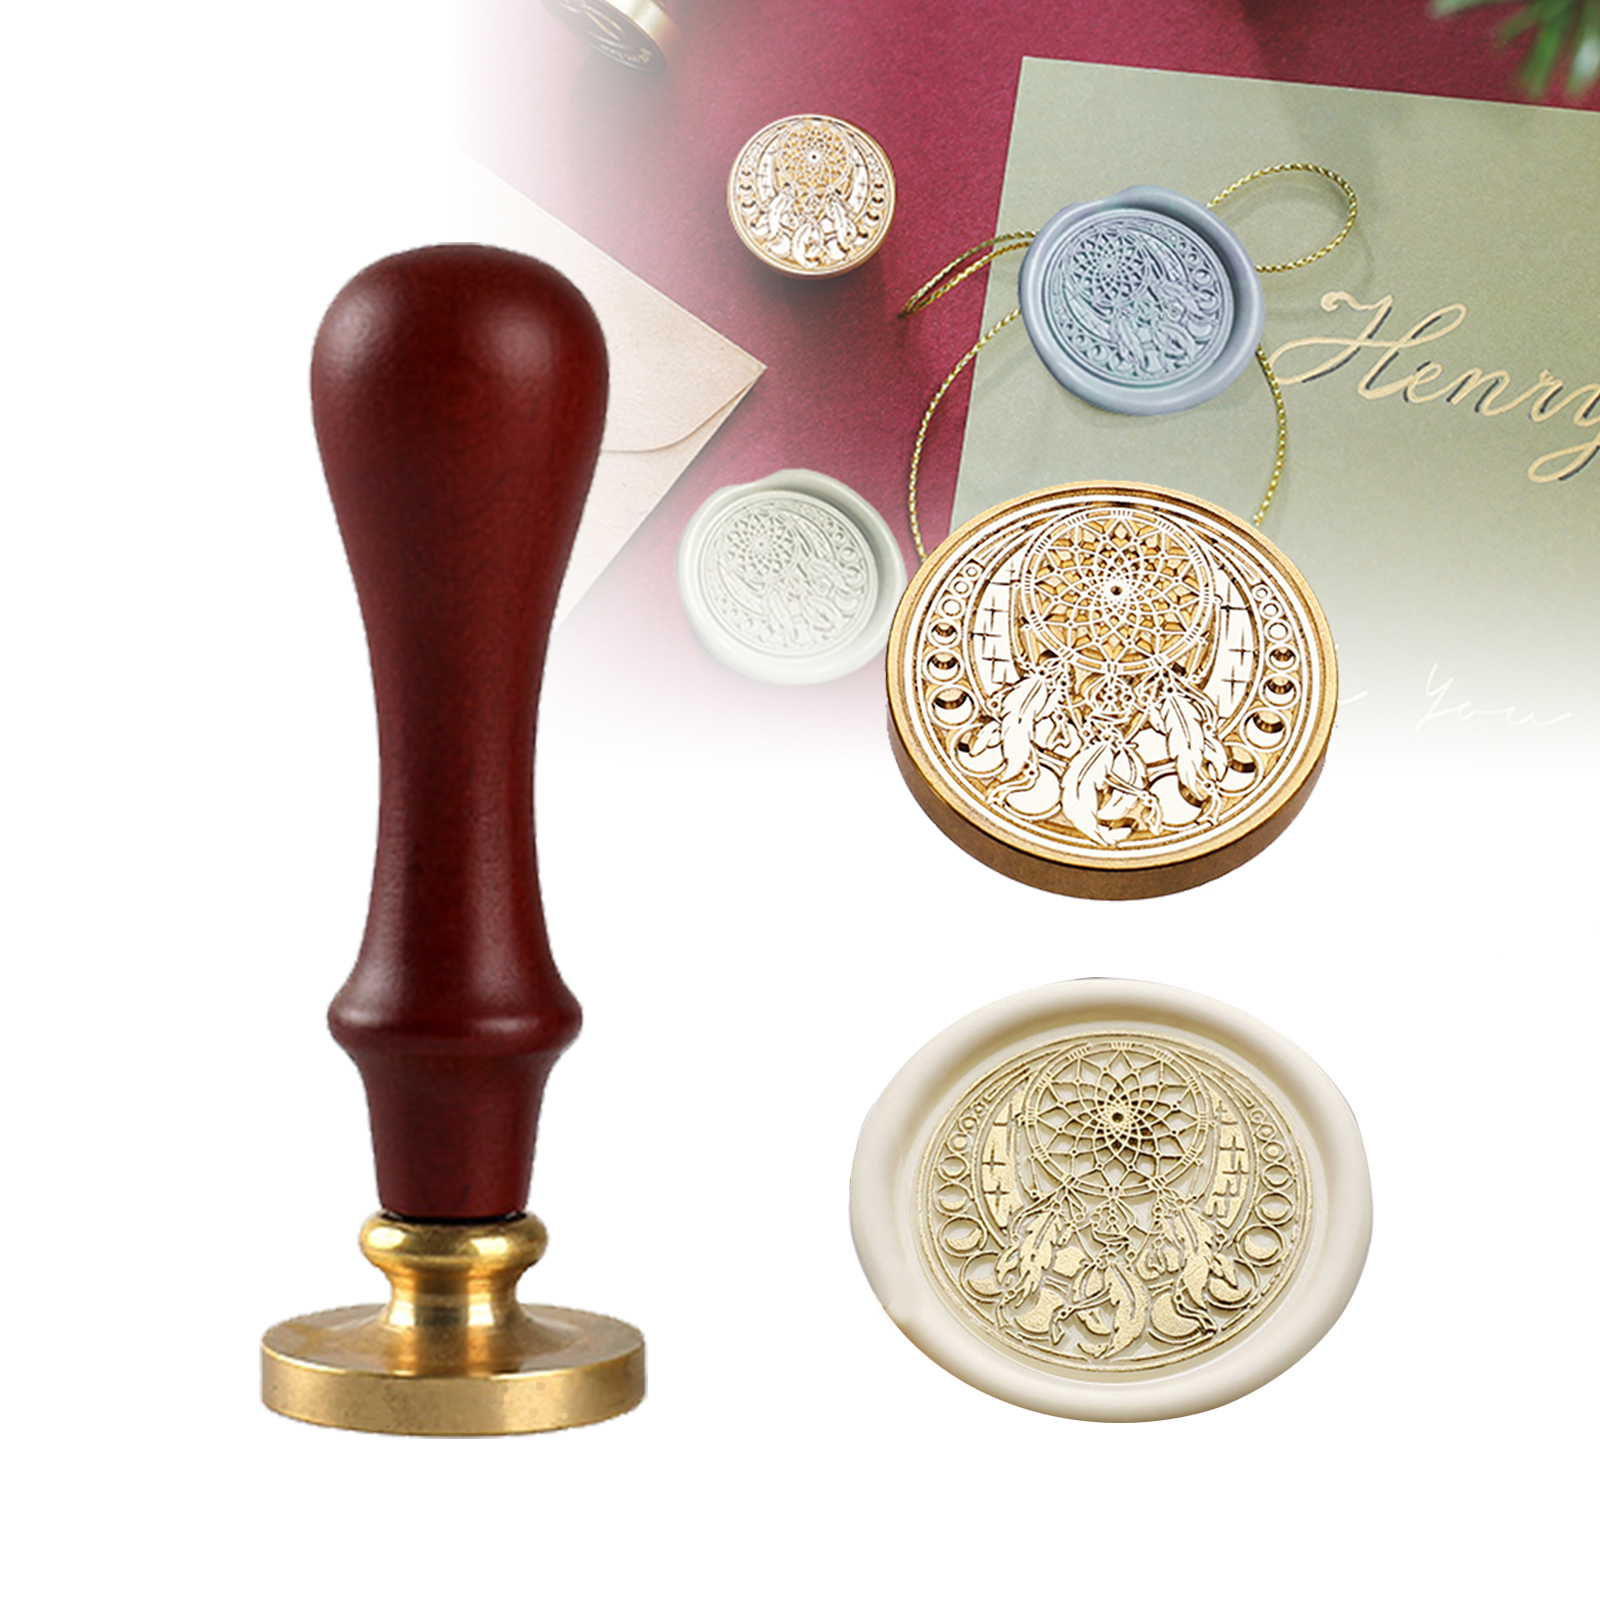 UCINNOVATE Dreamcatcher Wax Seal Stamp for Christmas Gift, Cards Envelopes, Invitations, Wine Packages